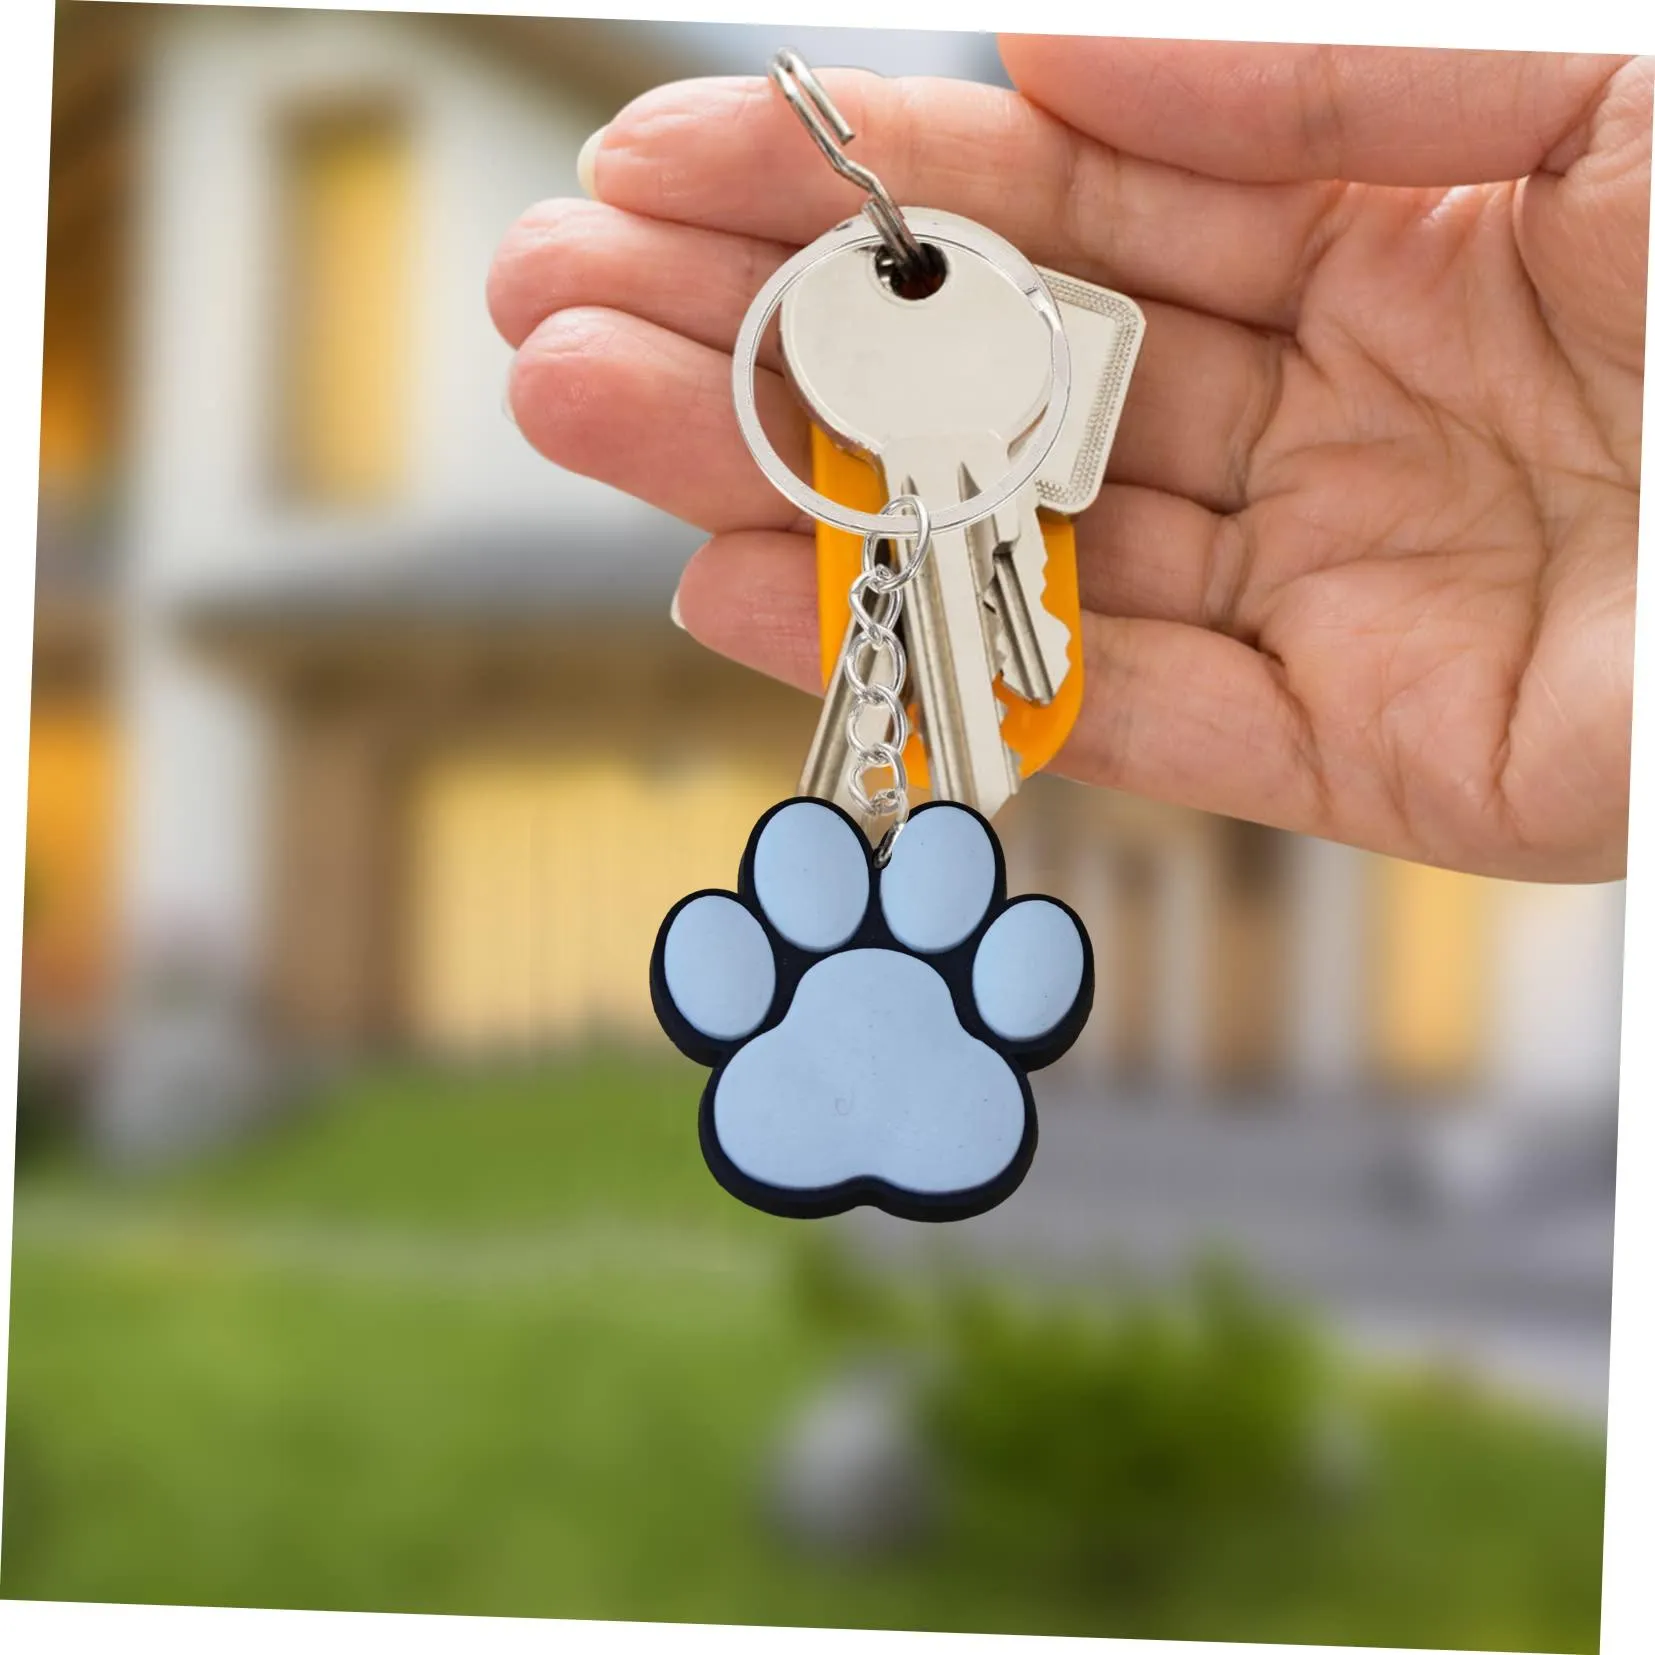 yellow dog keychain keyring for backpacks key ring women chain party favors gift suitable schoolbag pendant accessories bags rings keychains